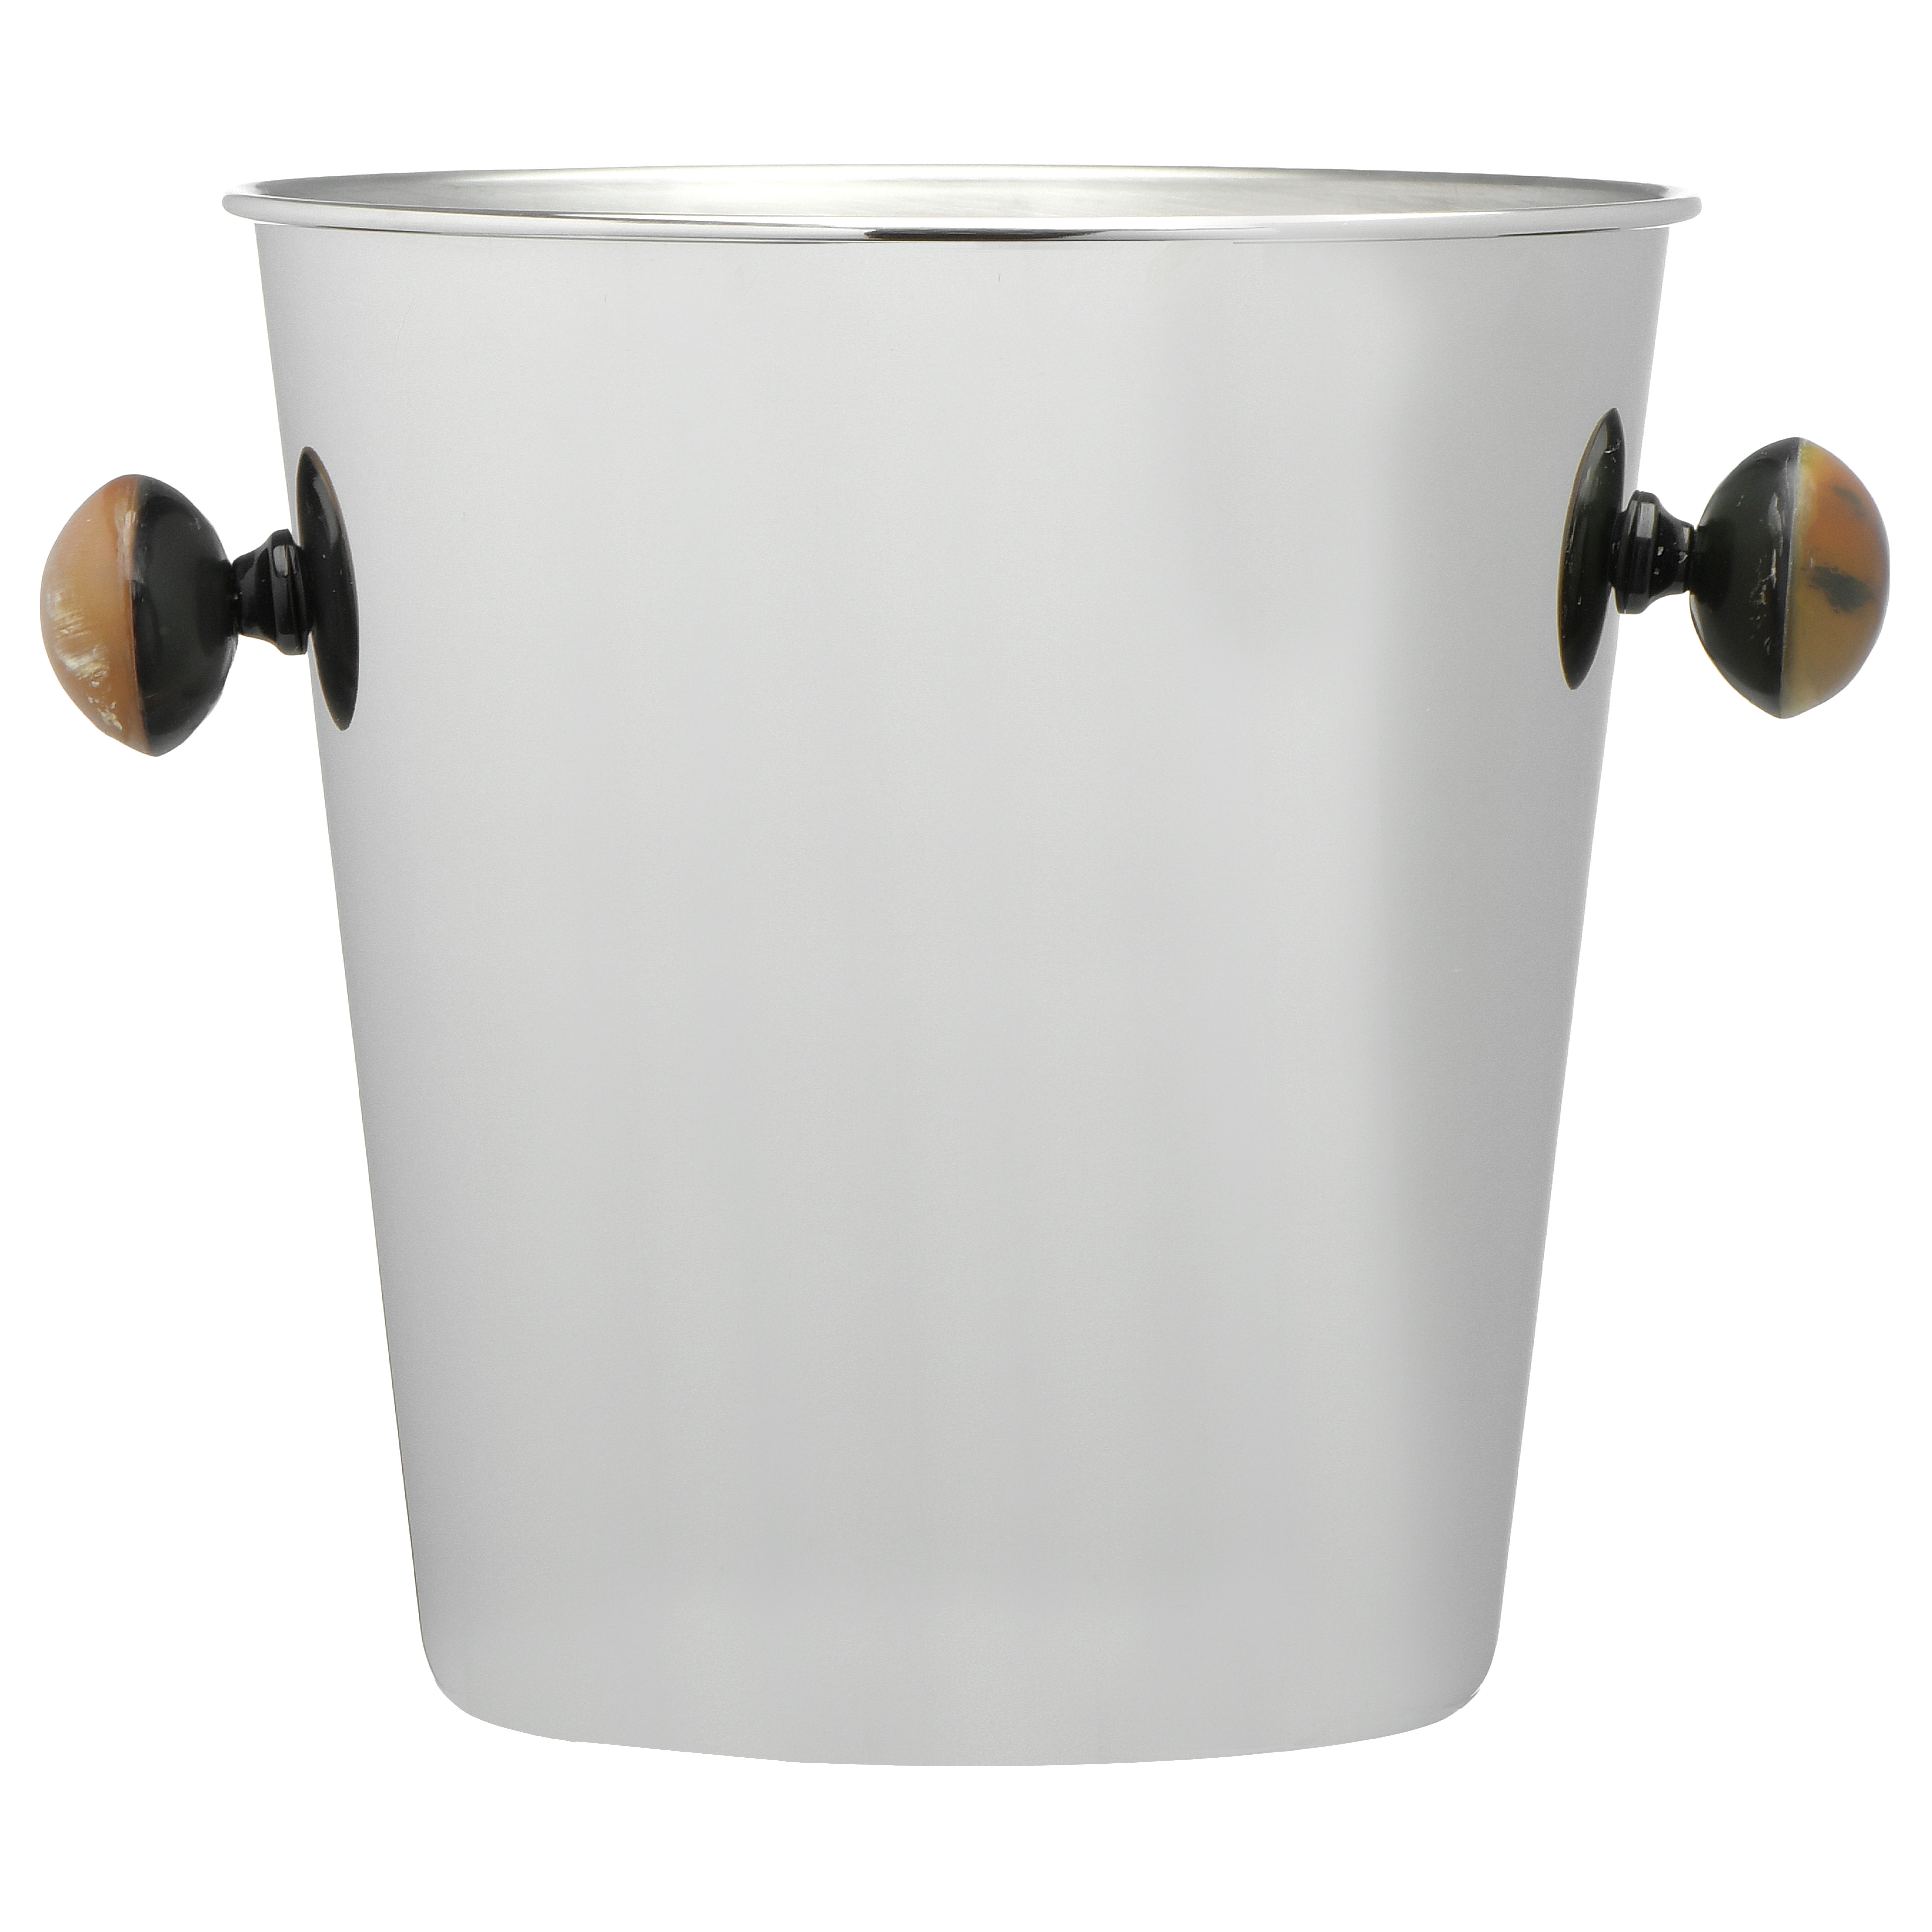 Quart Stainless Steel Ice Bucket with Horn Handles - Image 0